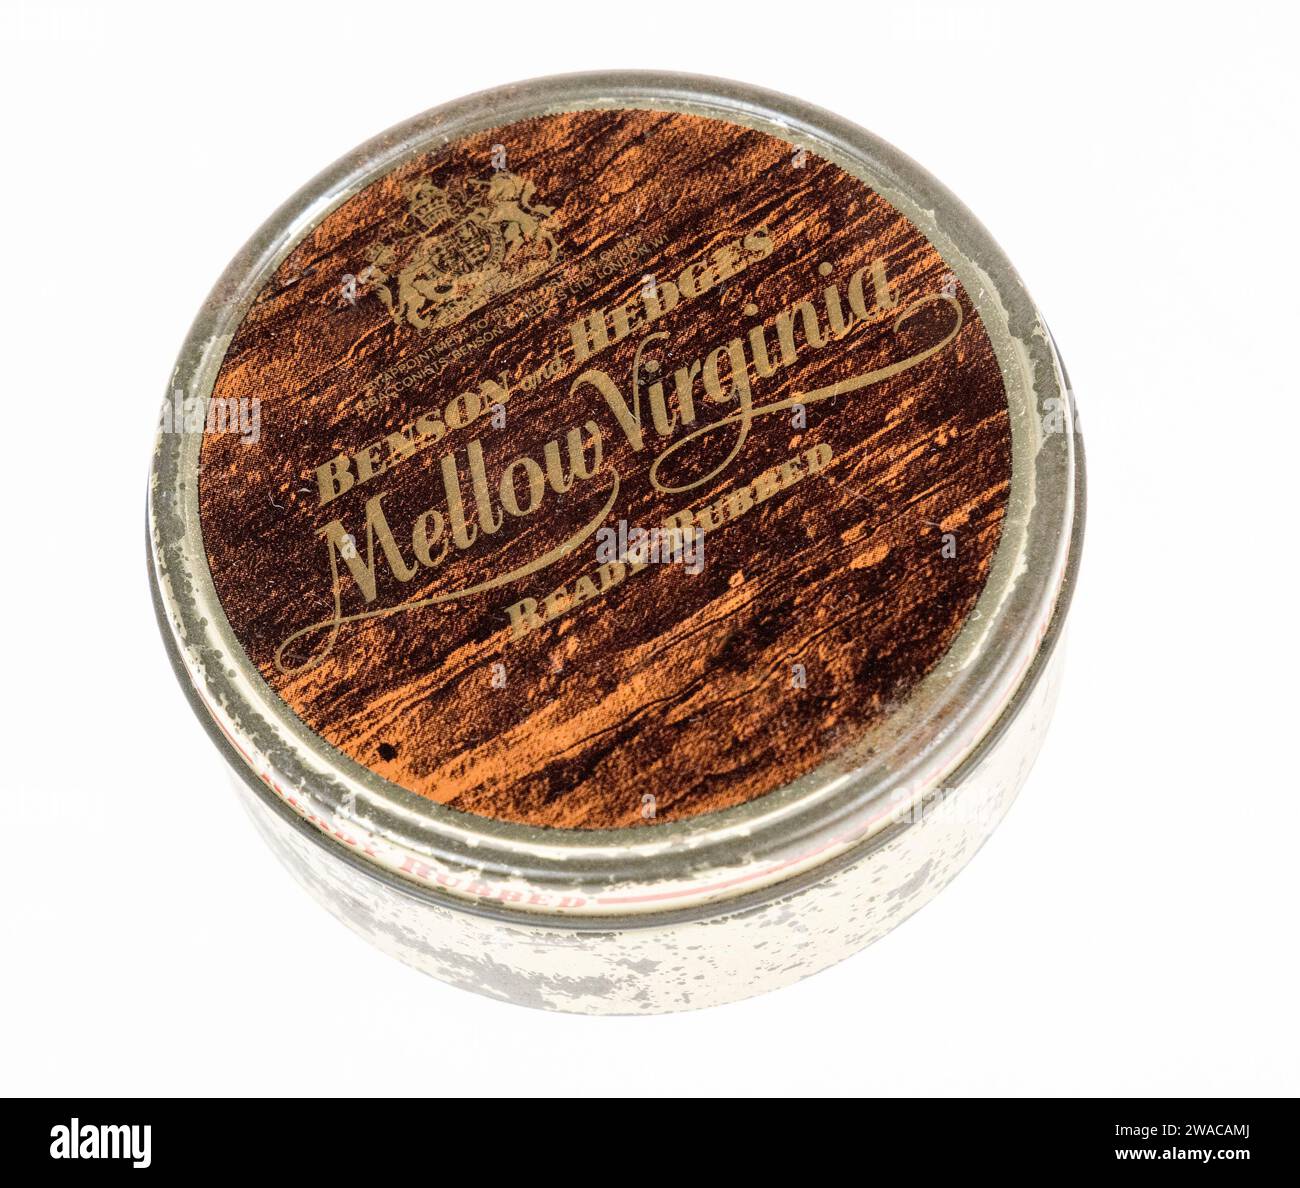 Mellow Virginia tin by Benson and Hedges ready rubbed tobacco from the 1970s, UK Stock Photo